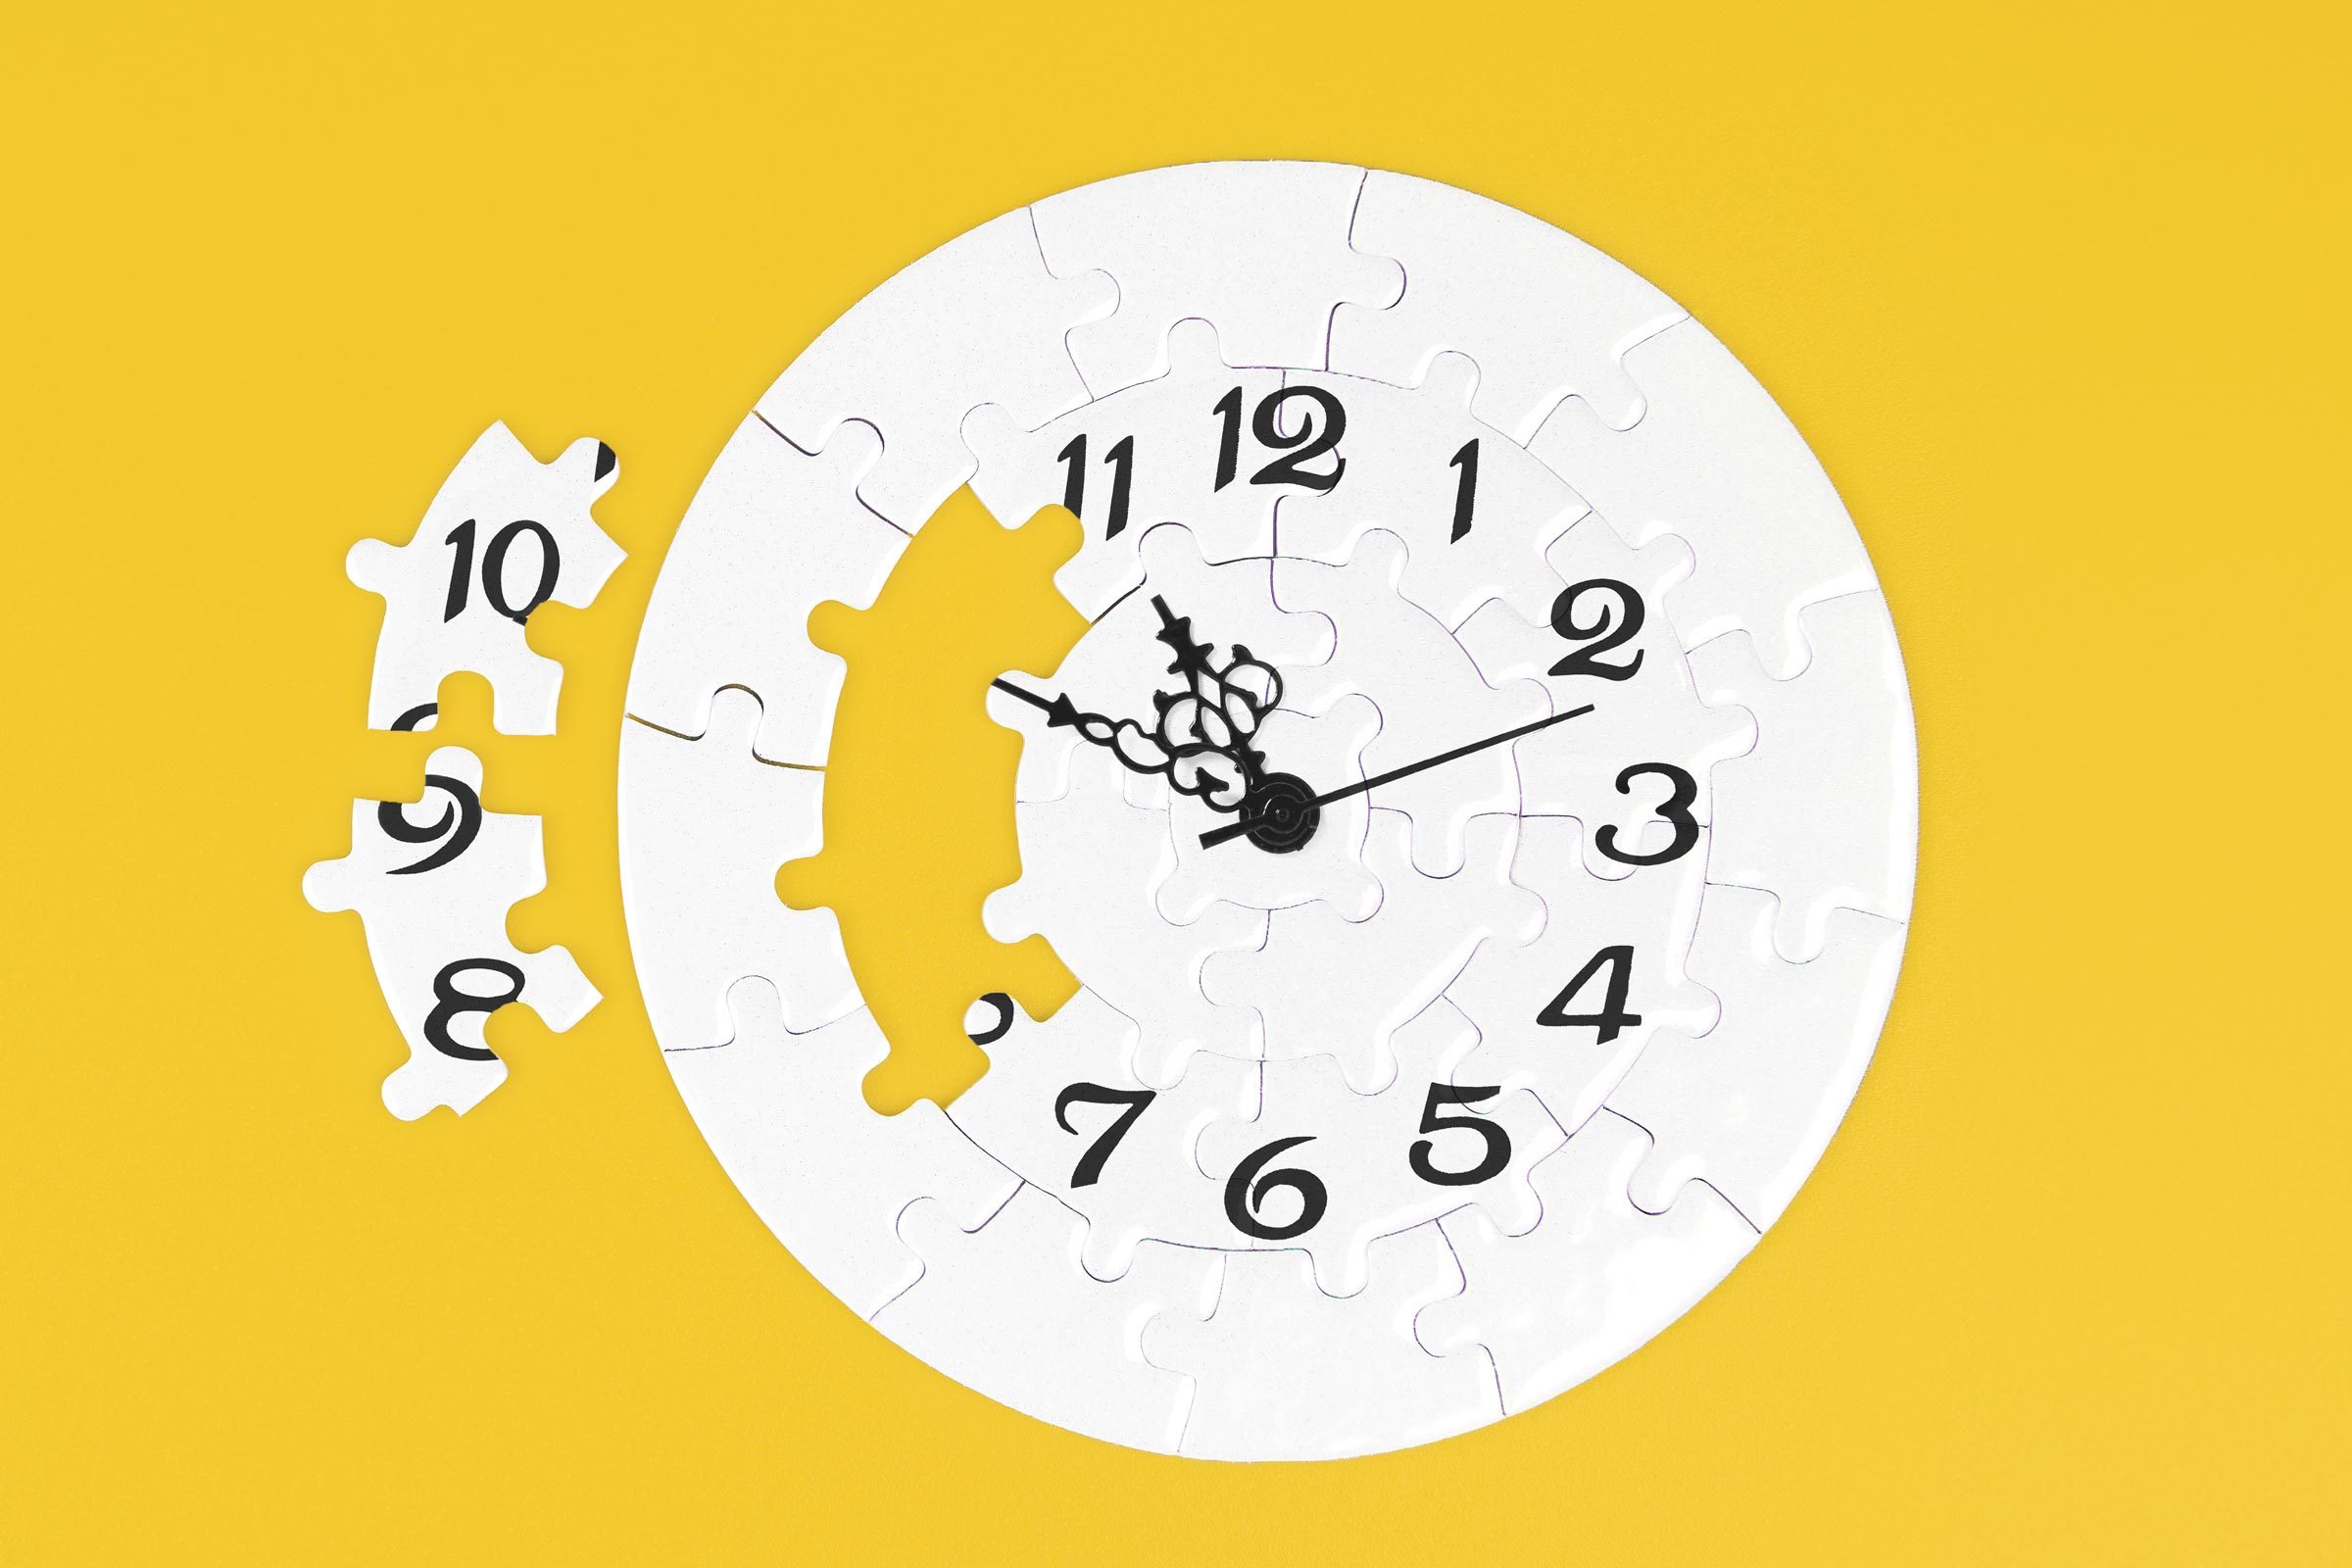 Puzzle Clock on a yellow background